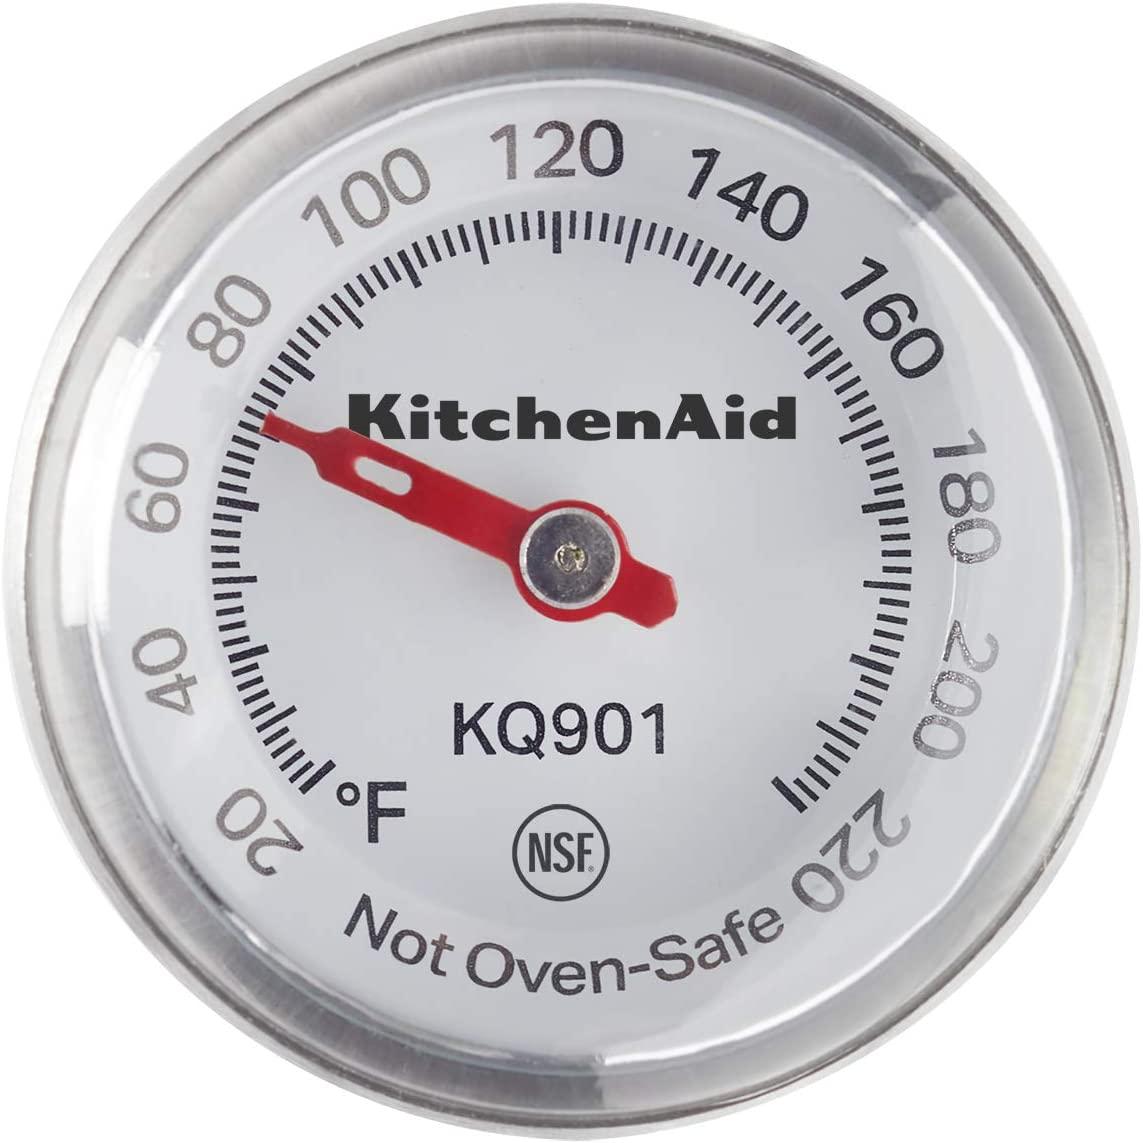 KitchenAid KQ907 Curved Stainless Steel Paddle Style Candy and Deep Fry  Thermometer with pan clip, TEMPERATURE RANGE: 100F to 400F, Black